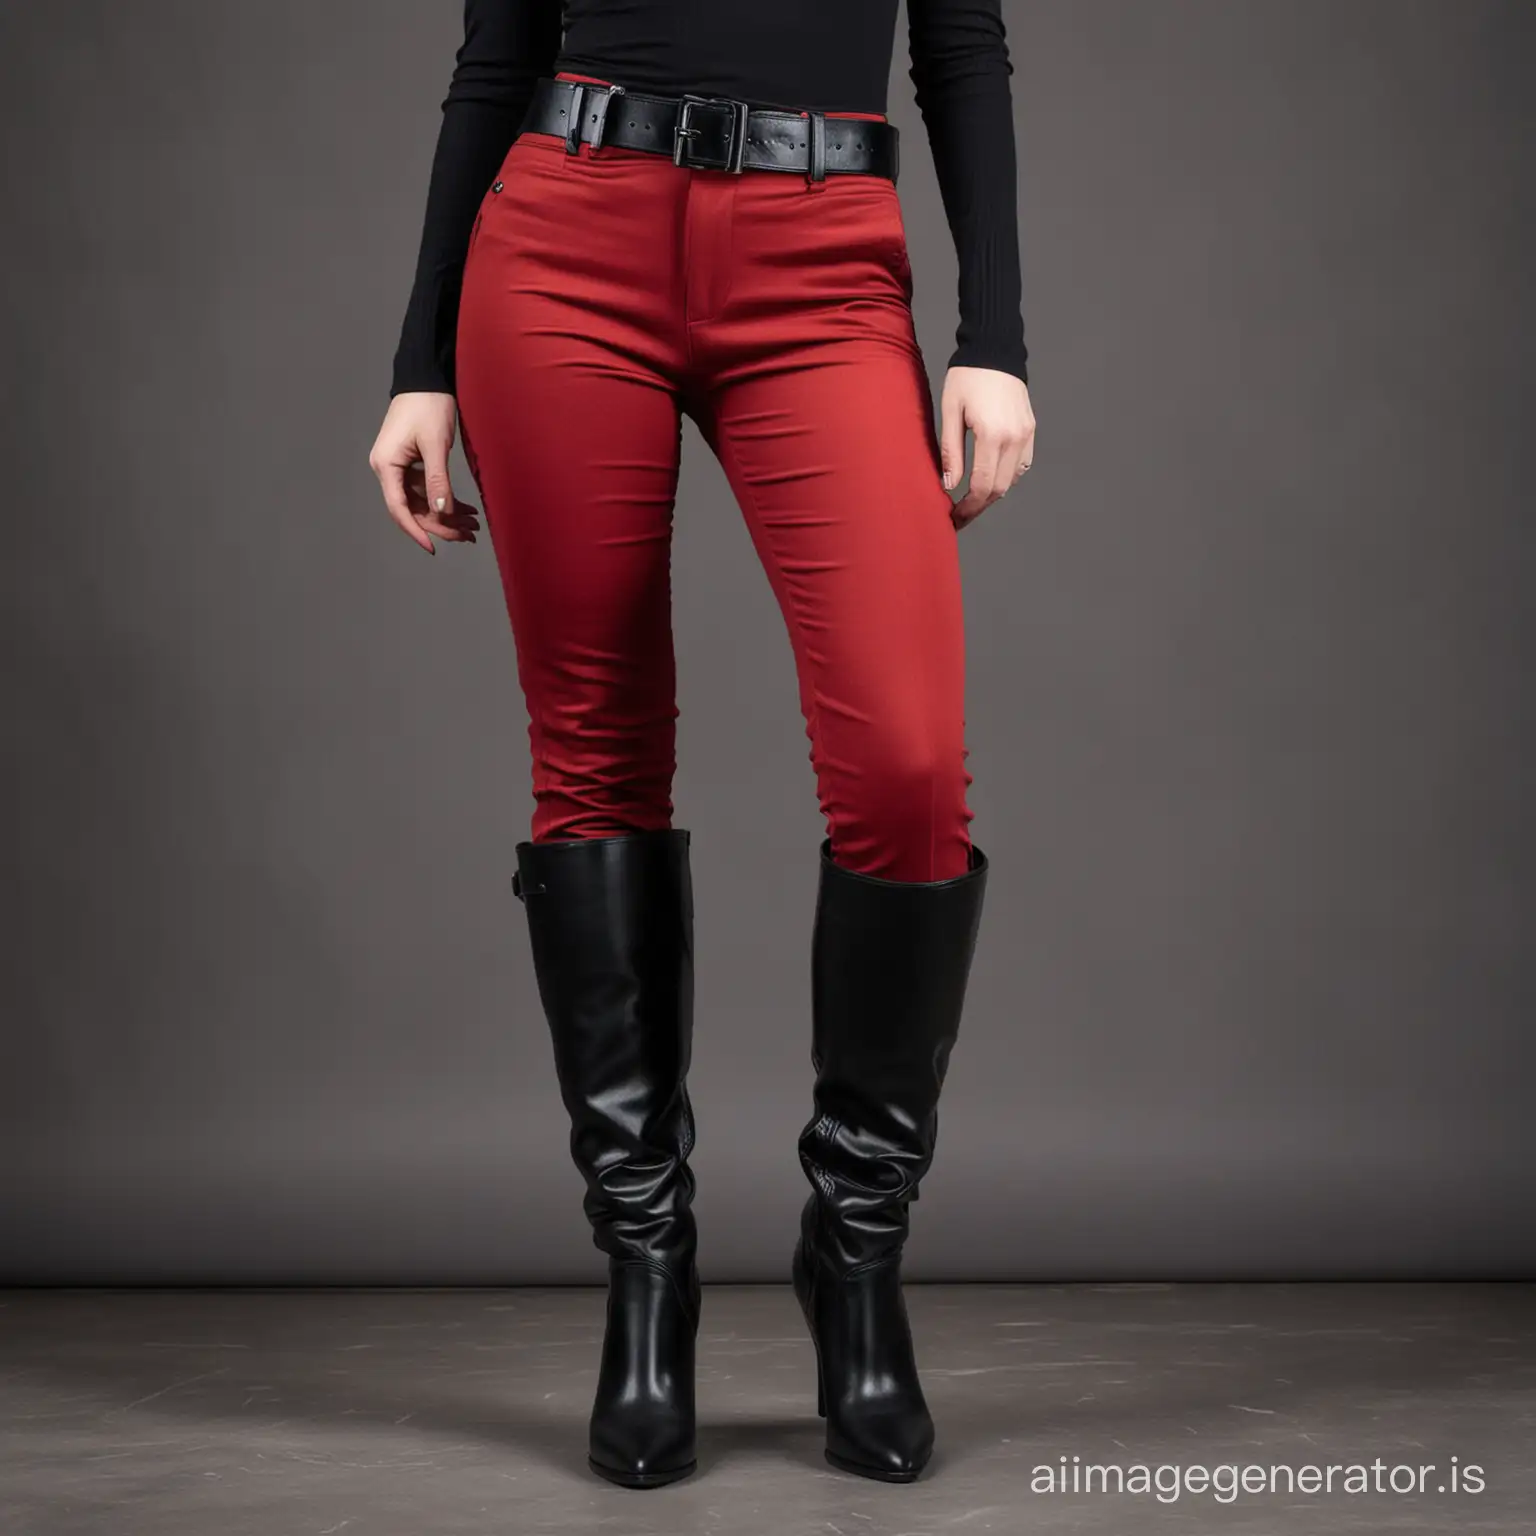 Fashionable-Woman-in-Red-Textile-Pants-and-Black-Knee-High-Boots